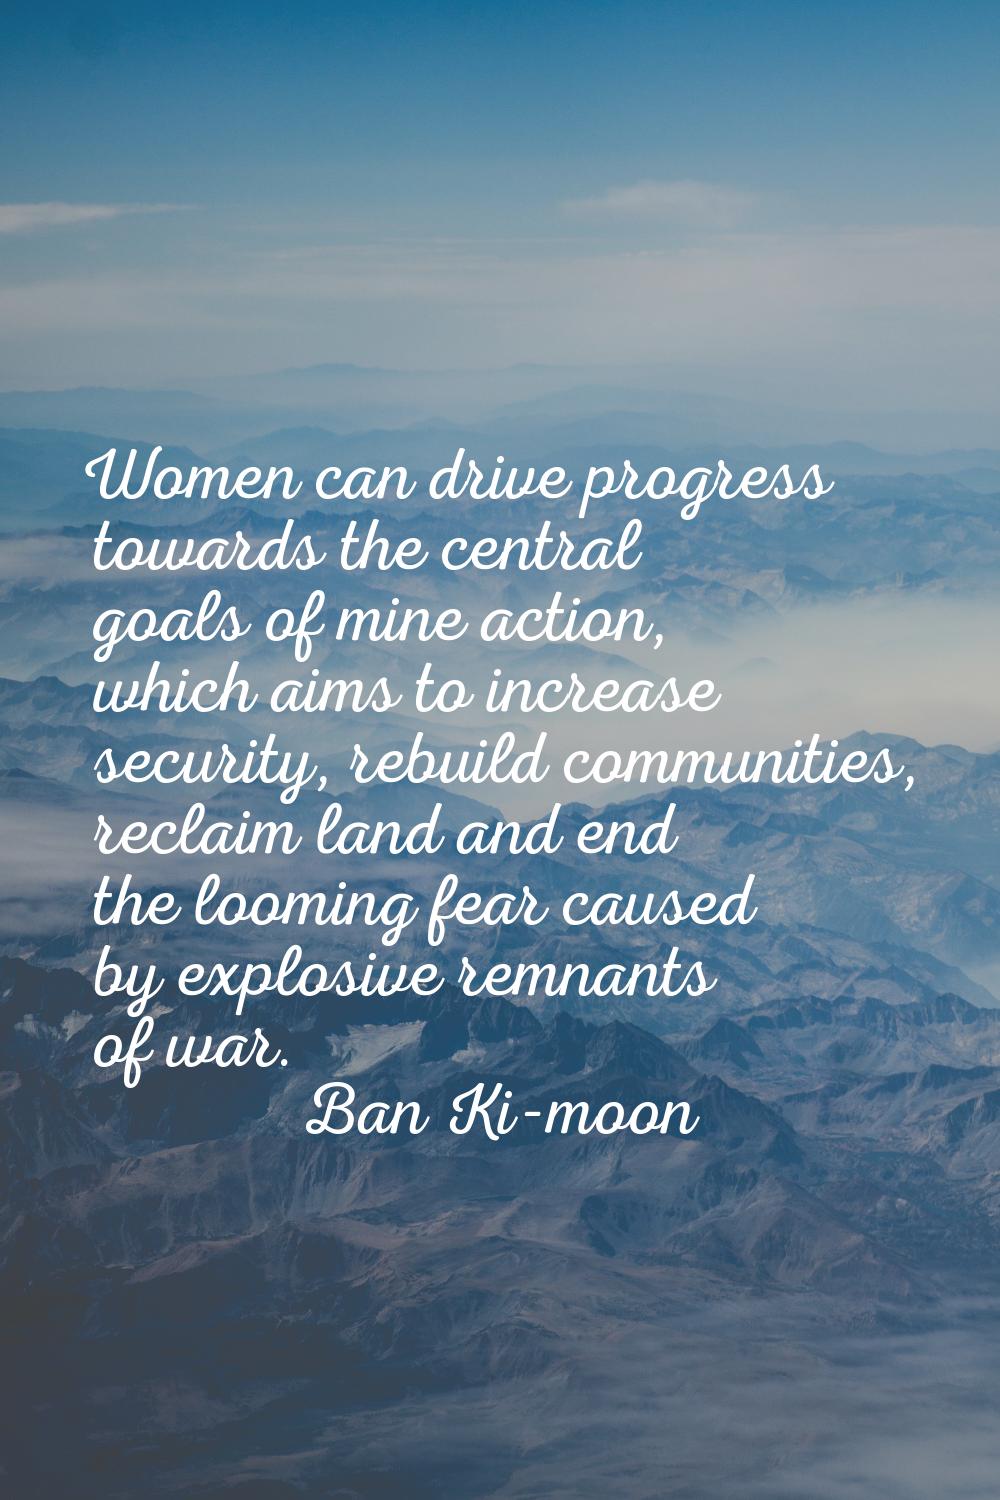 Women can drive progress towards the central goals of mine action, which aims to increase security,